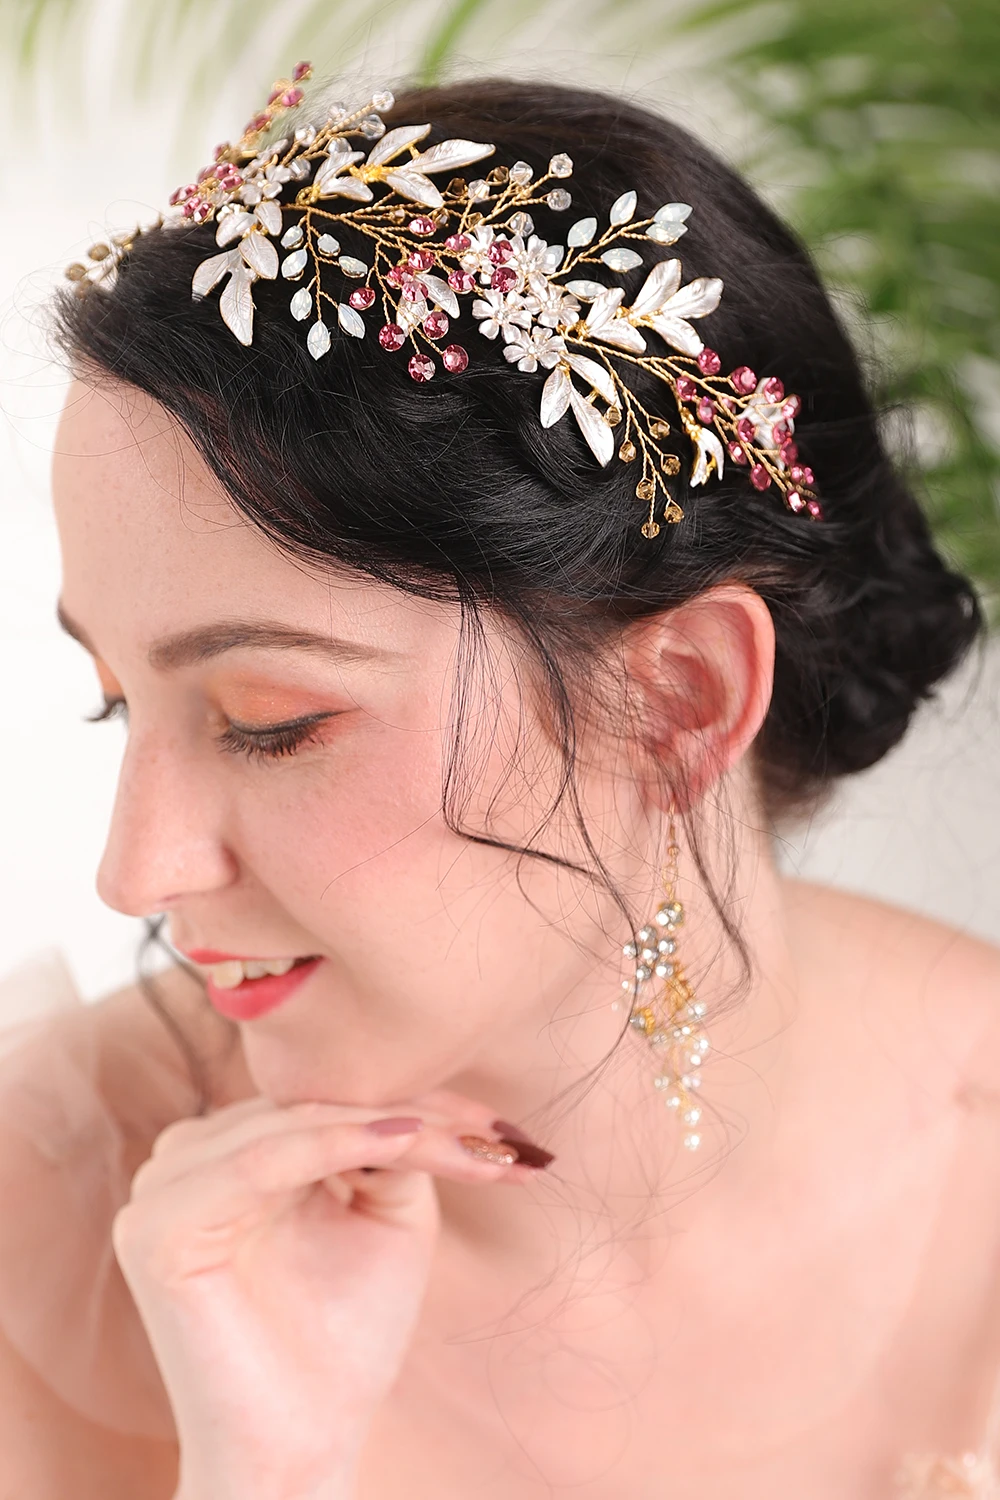 Gold-Bride-to-be-Set-of-Hair-Accessories-Wedding-Hat-and-earrings-Vintage-Leaves-banquet-party (1)